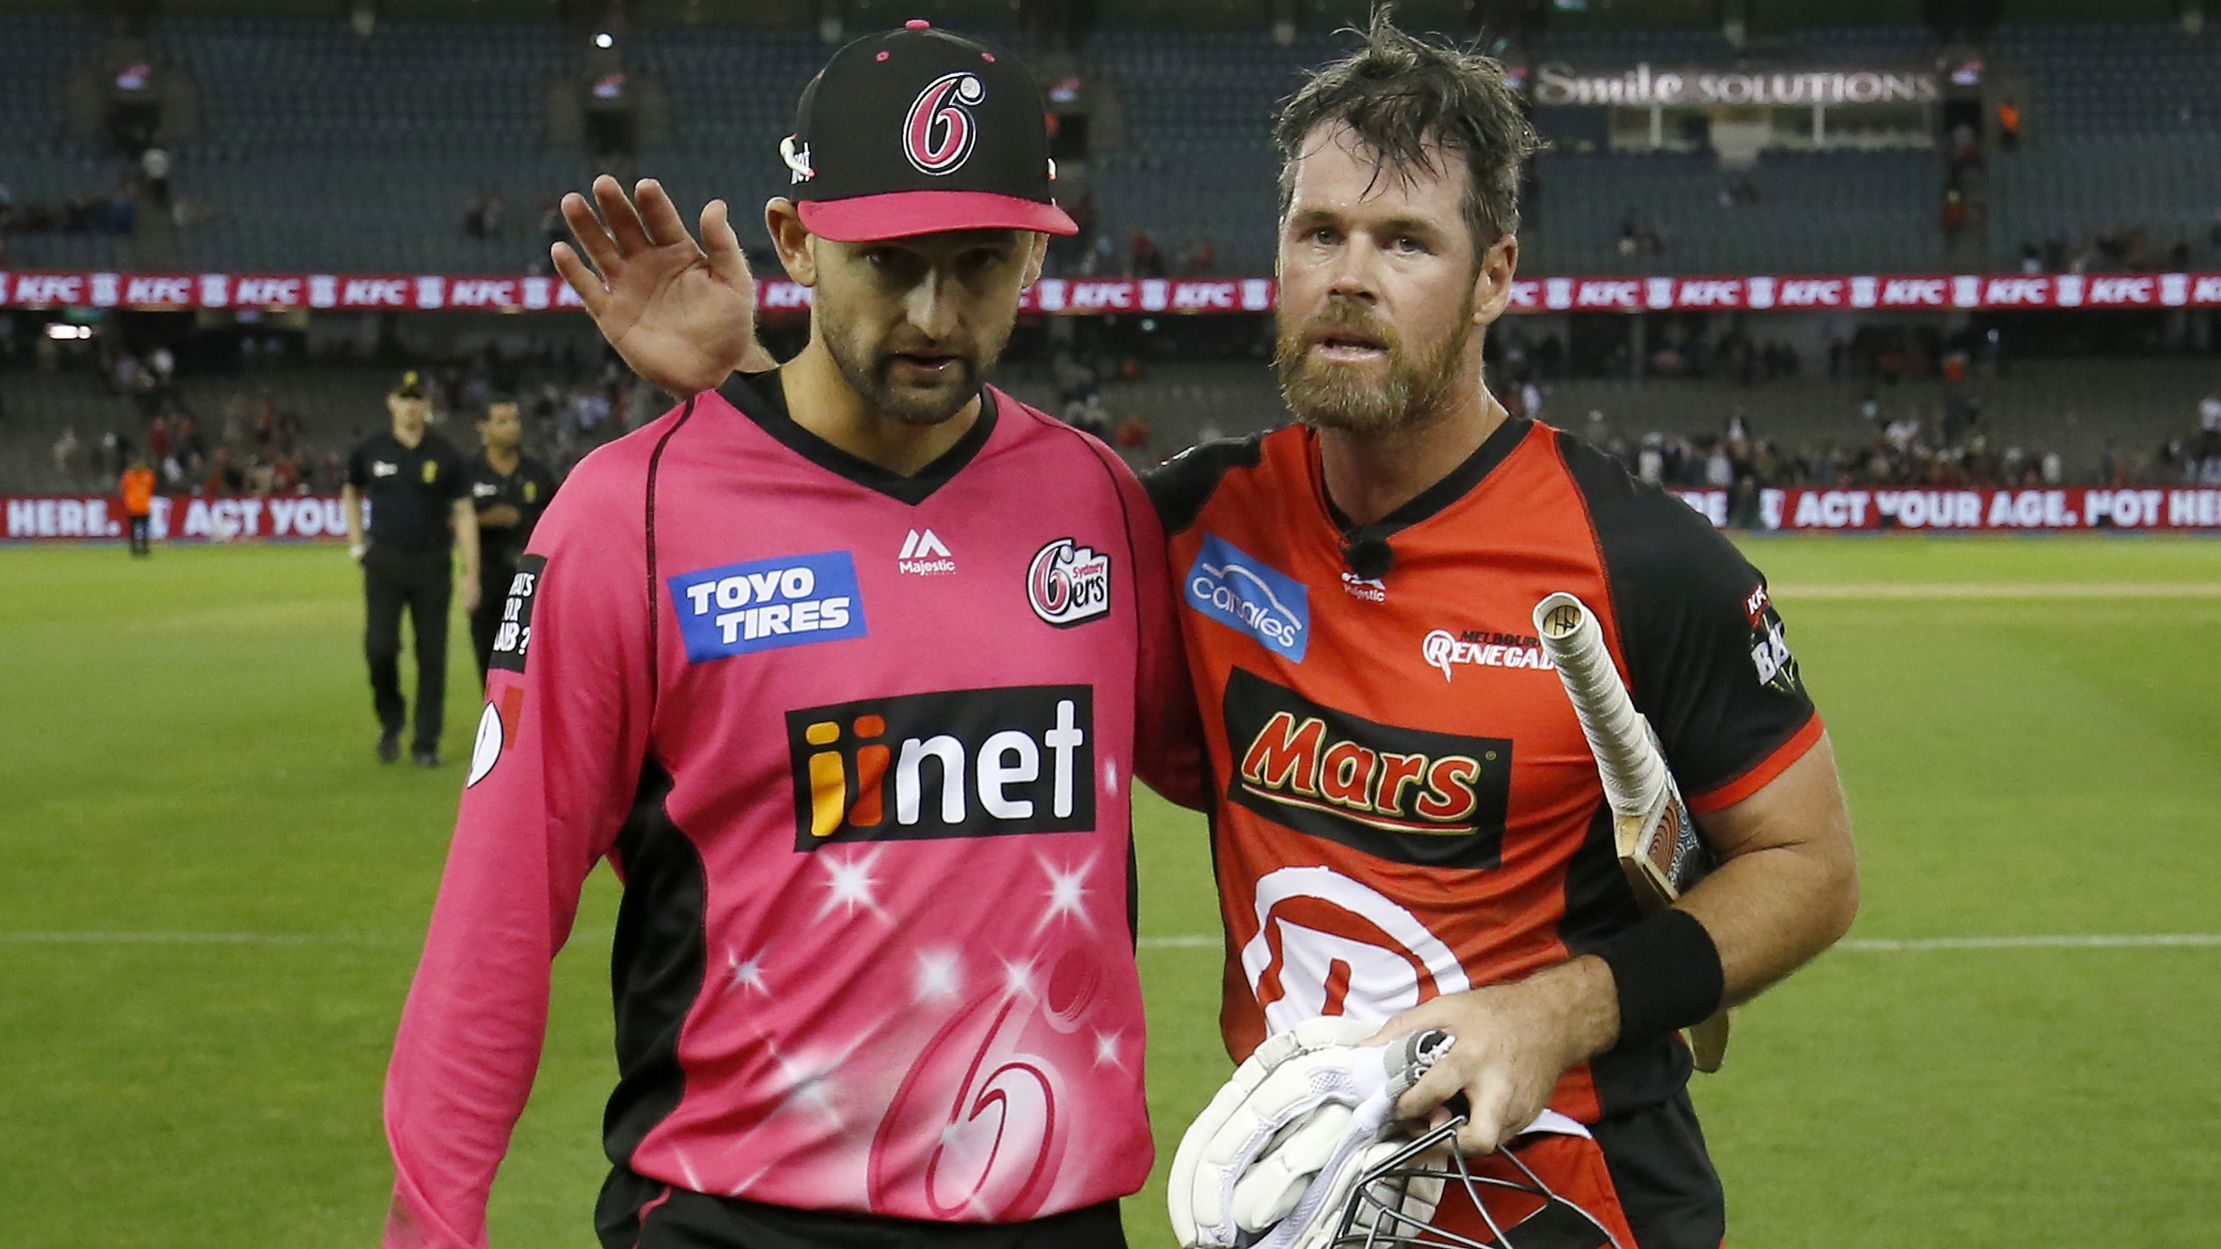 MELBOURNE, AUSTRALIA - FEBRUARY 15: Nathan Lyon of the Sydney Sixers and Dan Christian of the Renegades embrace after  the Big Bash League semi final between the Melbourne Renegades v Sydney Sixers at Marvel Stadium on February 15, 2019 in Melbourne, Australia. (Photo by Darrian Traynor - CA/Cricket Australia via Getty Images/Getty Images)